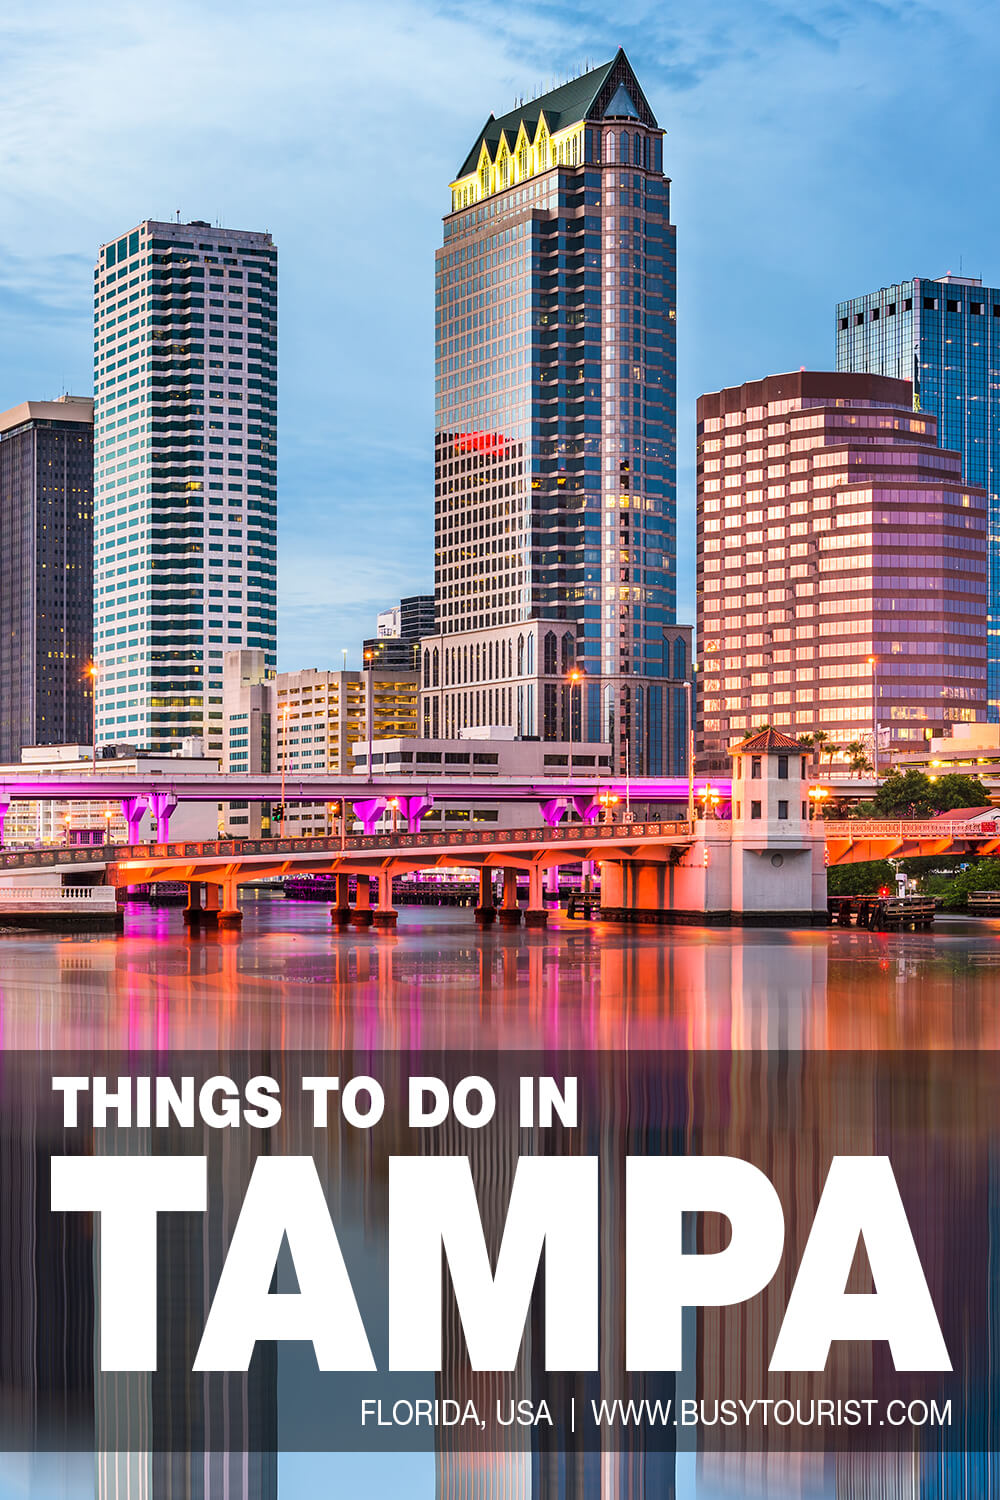 23 Best & Fun Things To Do In Tampa (FL) Attractions & Activities